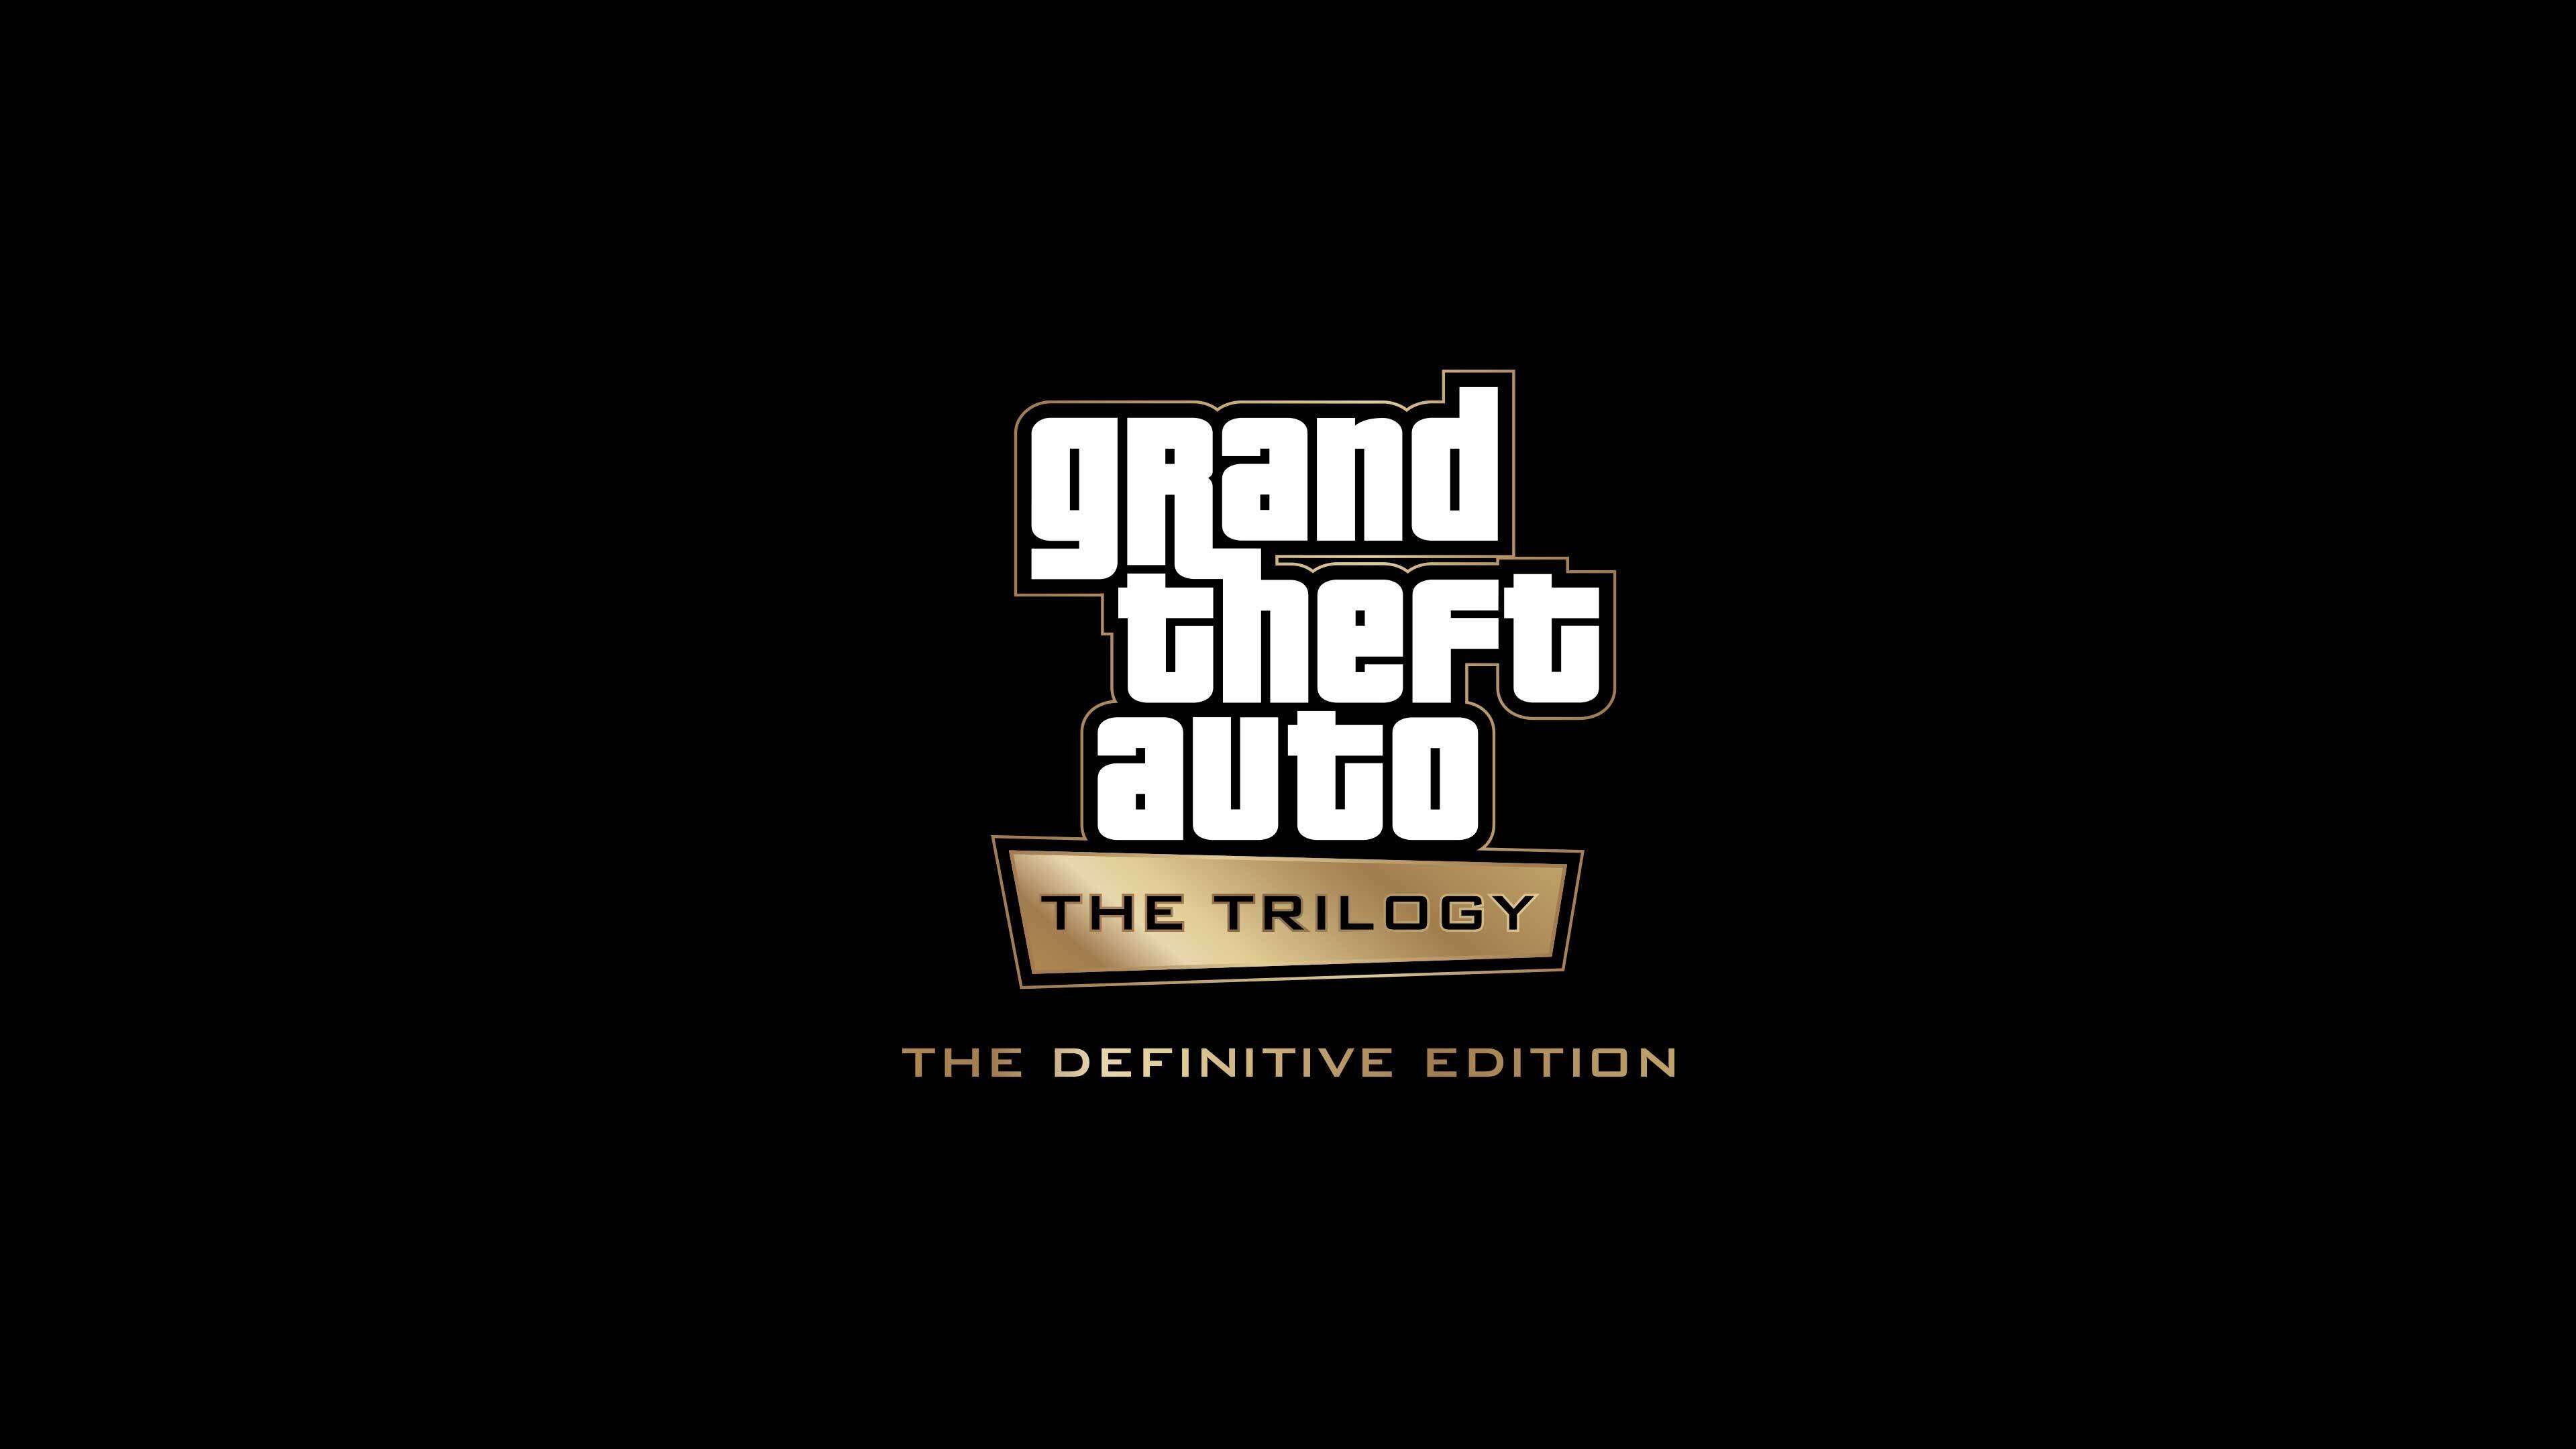 More information about "Rockstar is betreurt over de chaotische lancering van Grand Theft Auto: The Trilogy – The Definitive Edition"